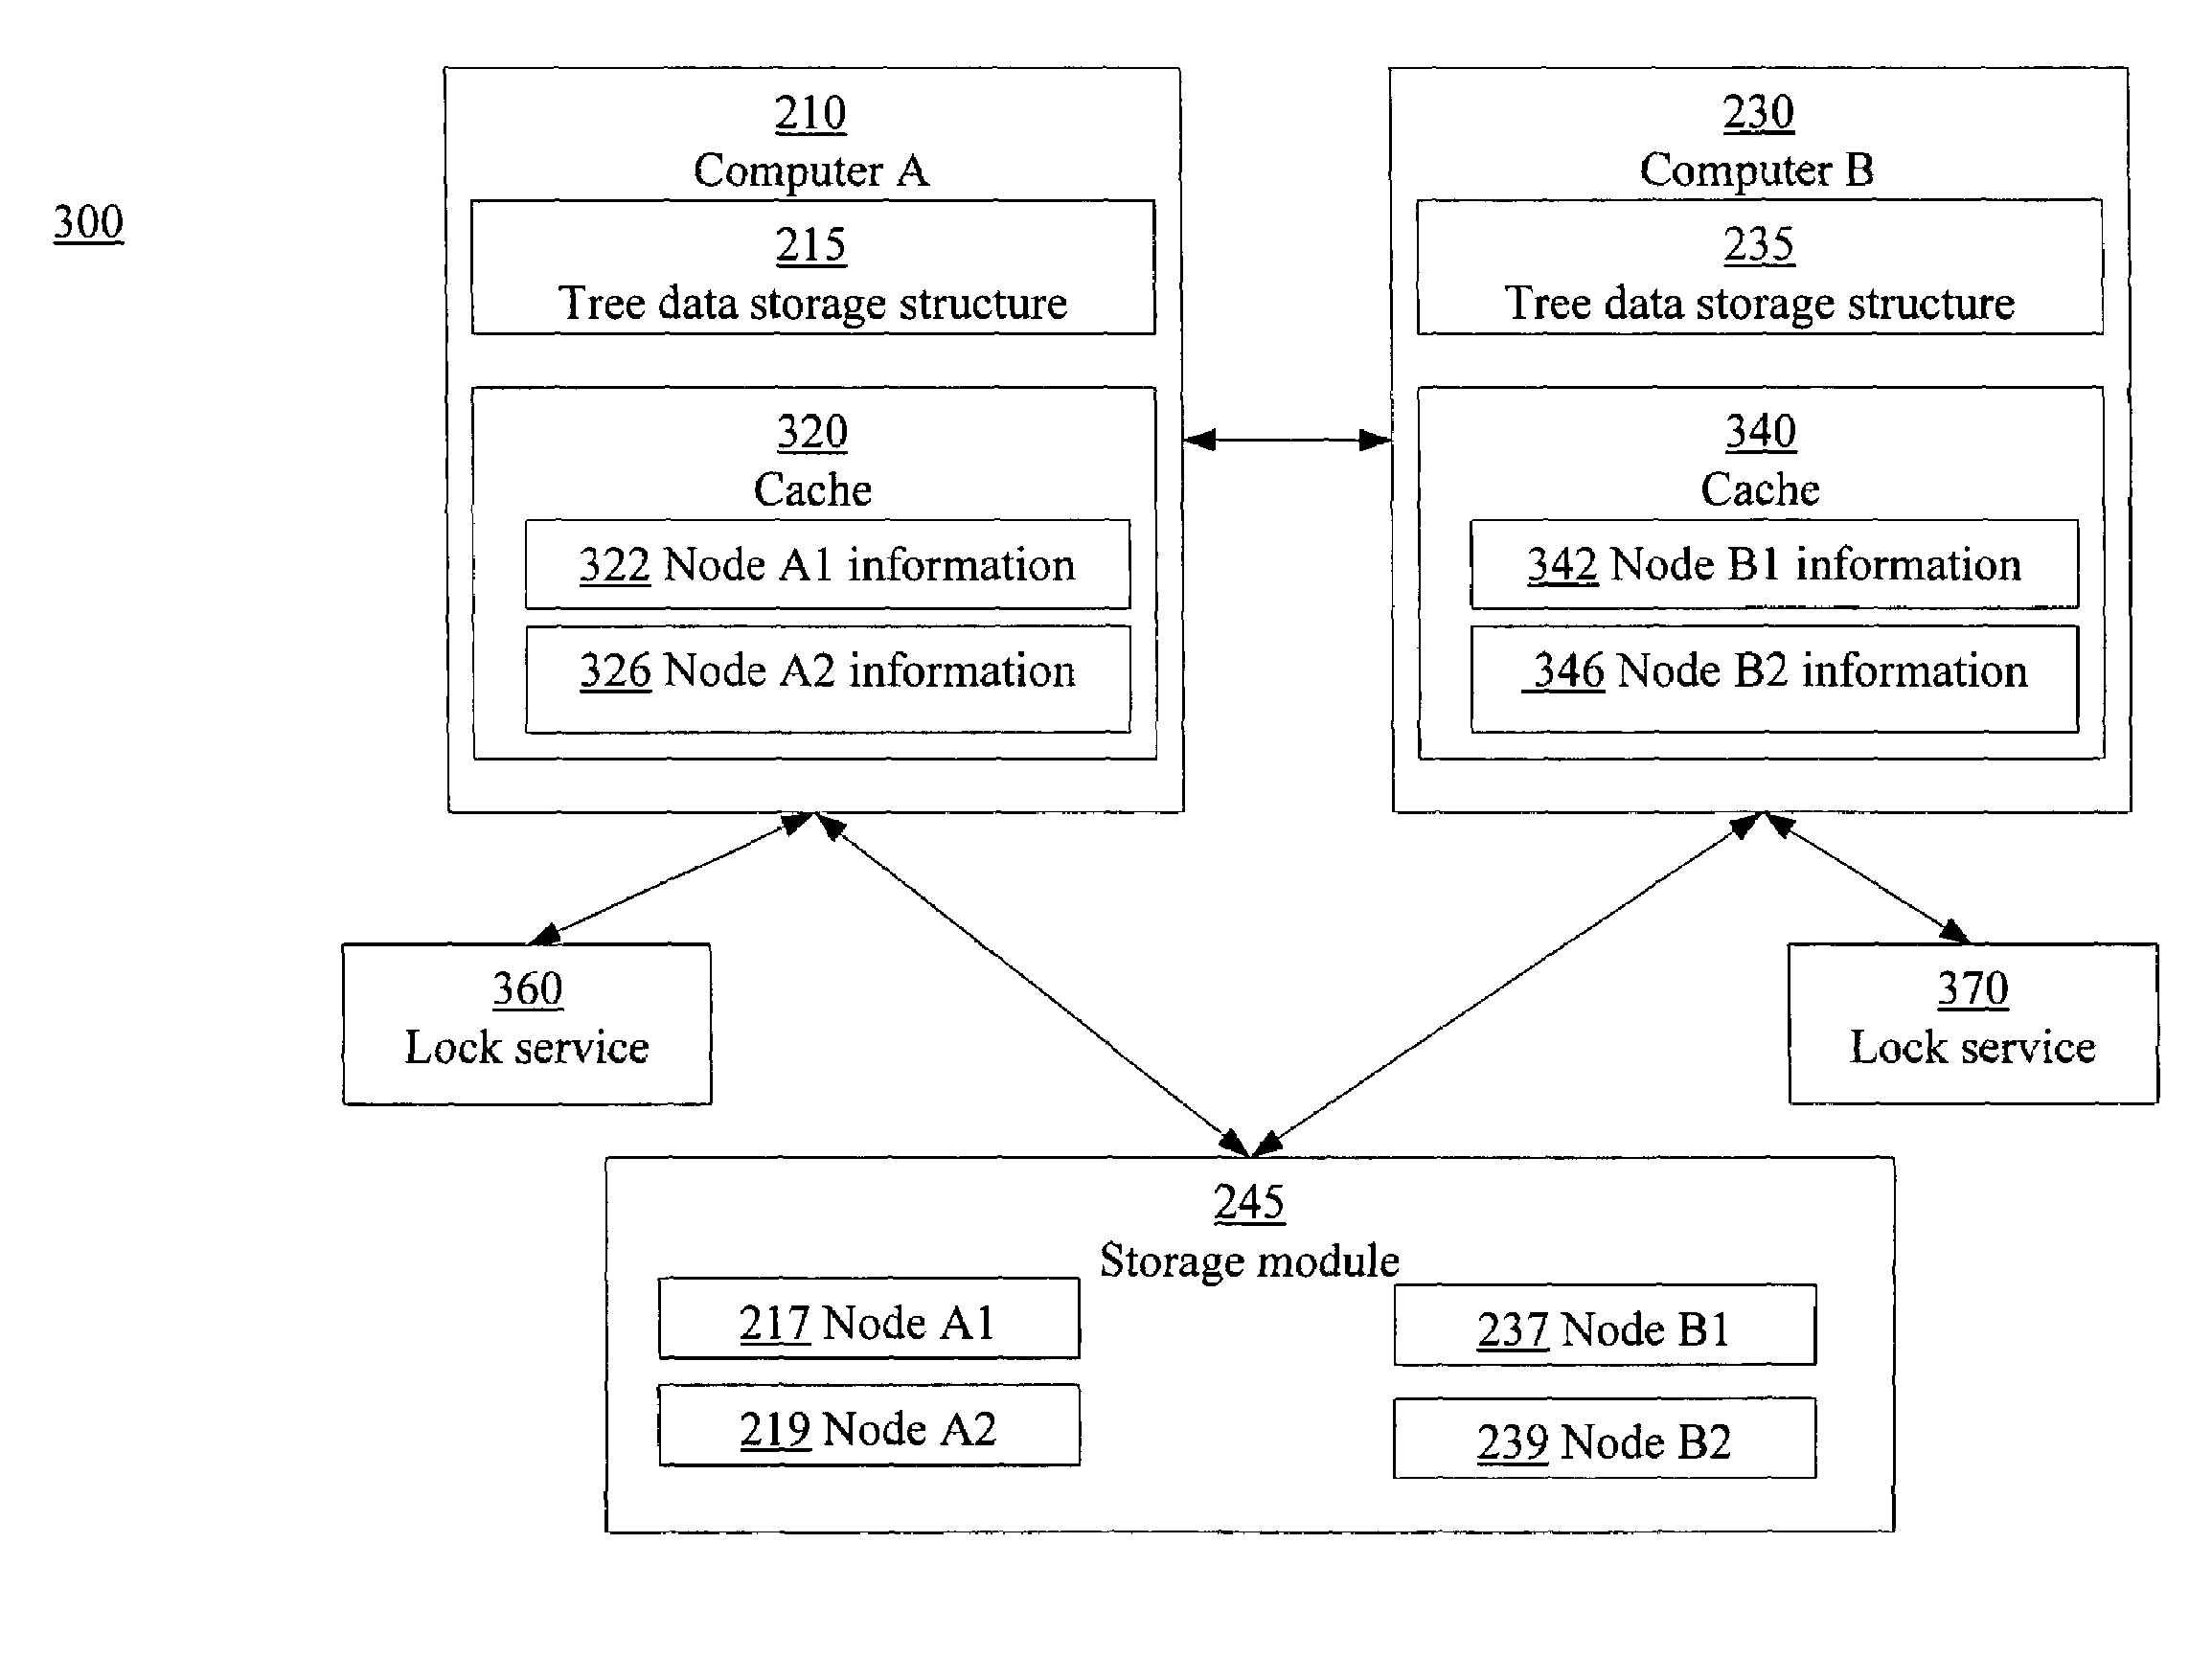 Implementing a tree data storage structure in a distributed environment